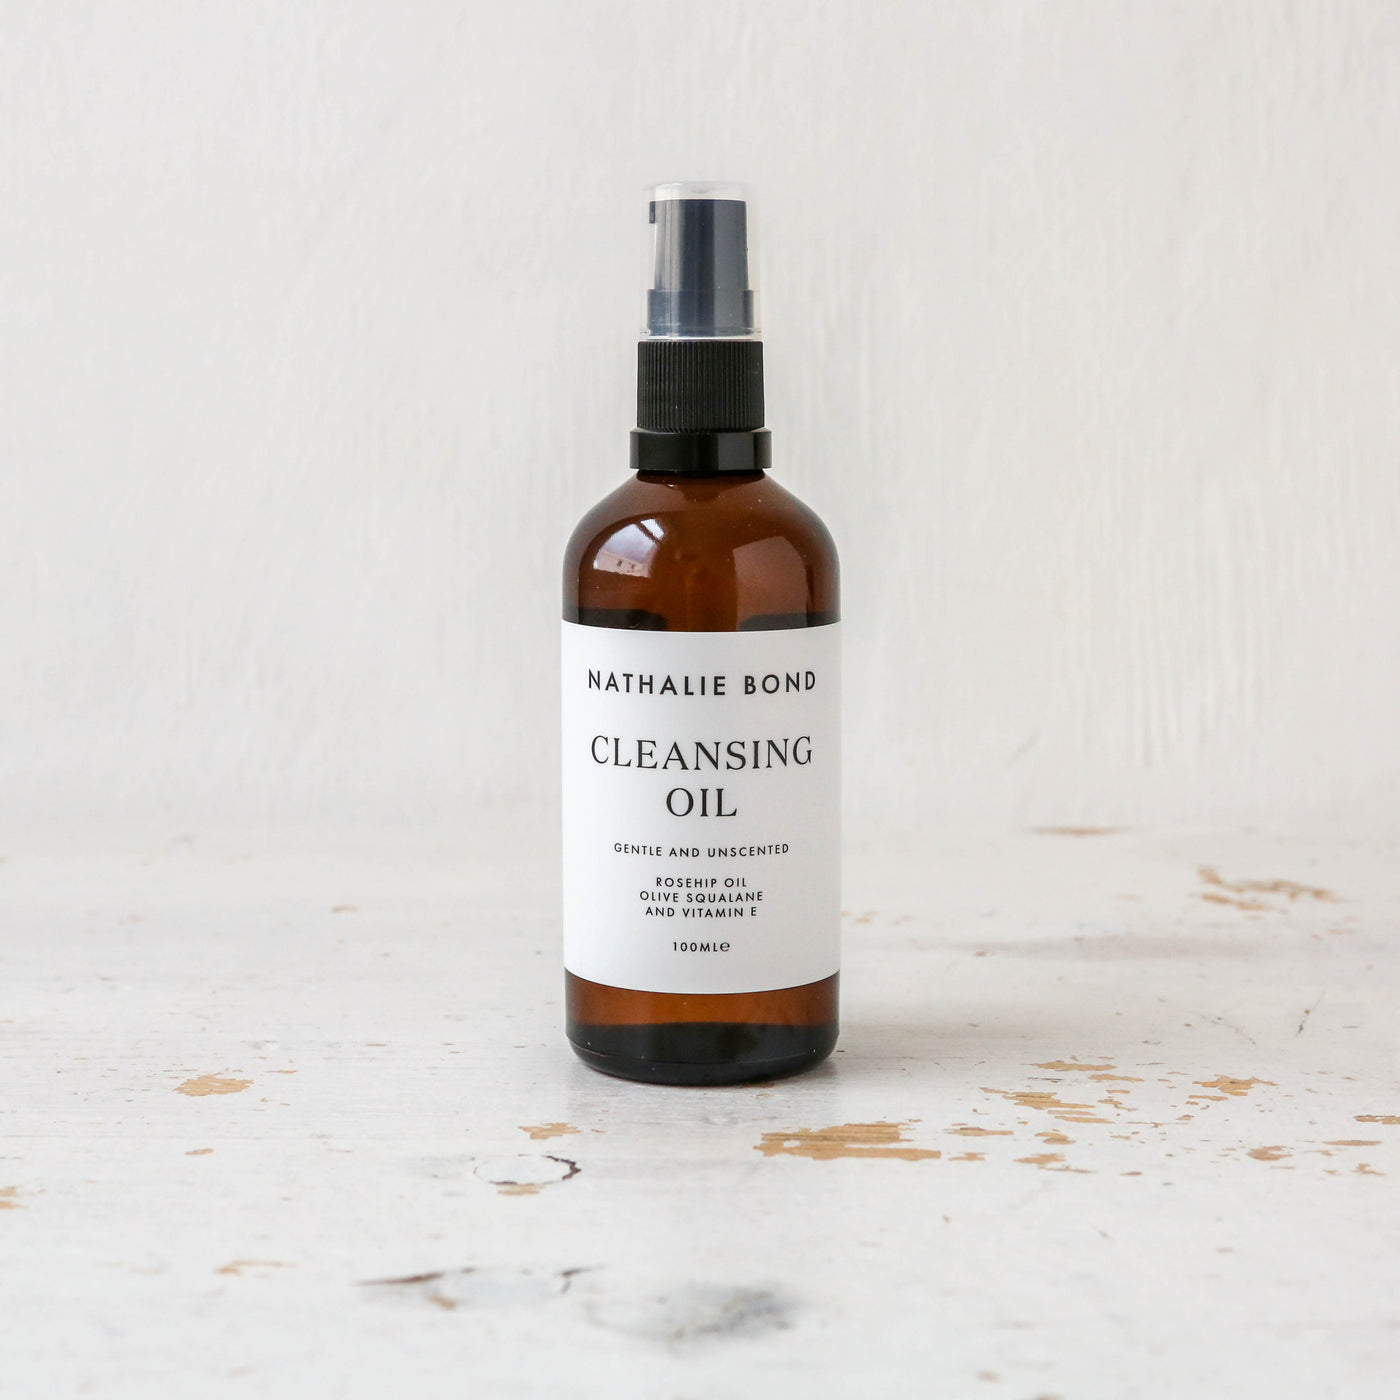 Cleansing Oil by Nathalie Bond